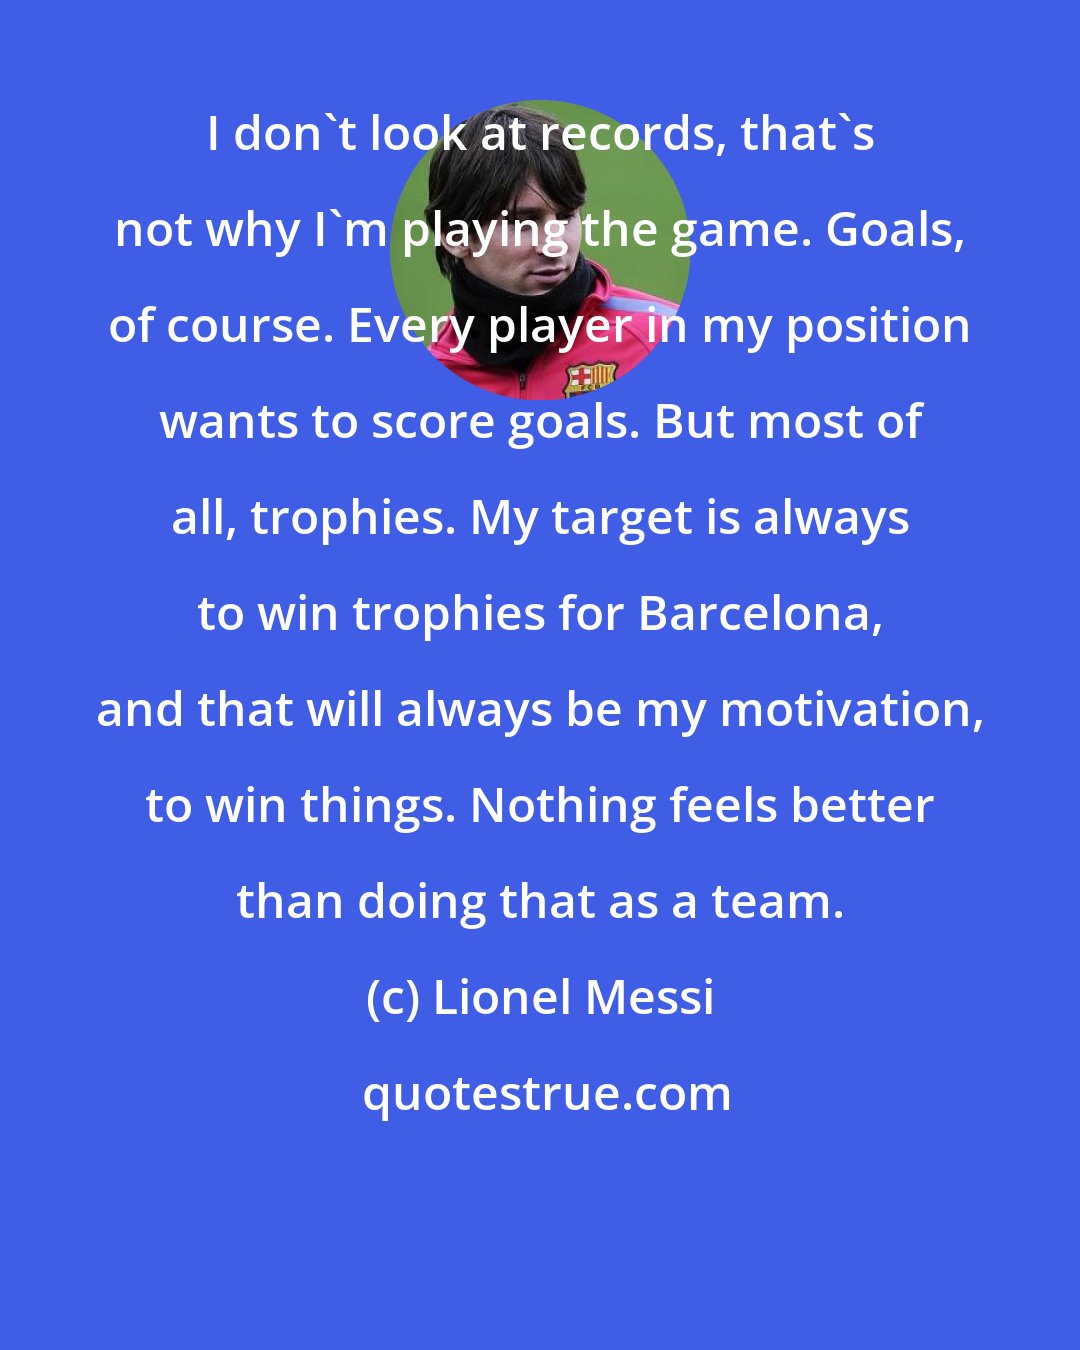 Lionel Messi: I don't look at records, that's not why I'm playing the game. Goals, of course. Every player in my position wants to score goals. But most of all, trophies. My target is always to win trophies for Barcelona, and that will always be my motivation, to win things. Nothing feels better than doing that as a team.